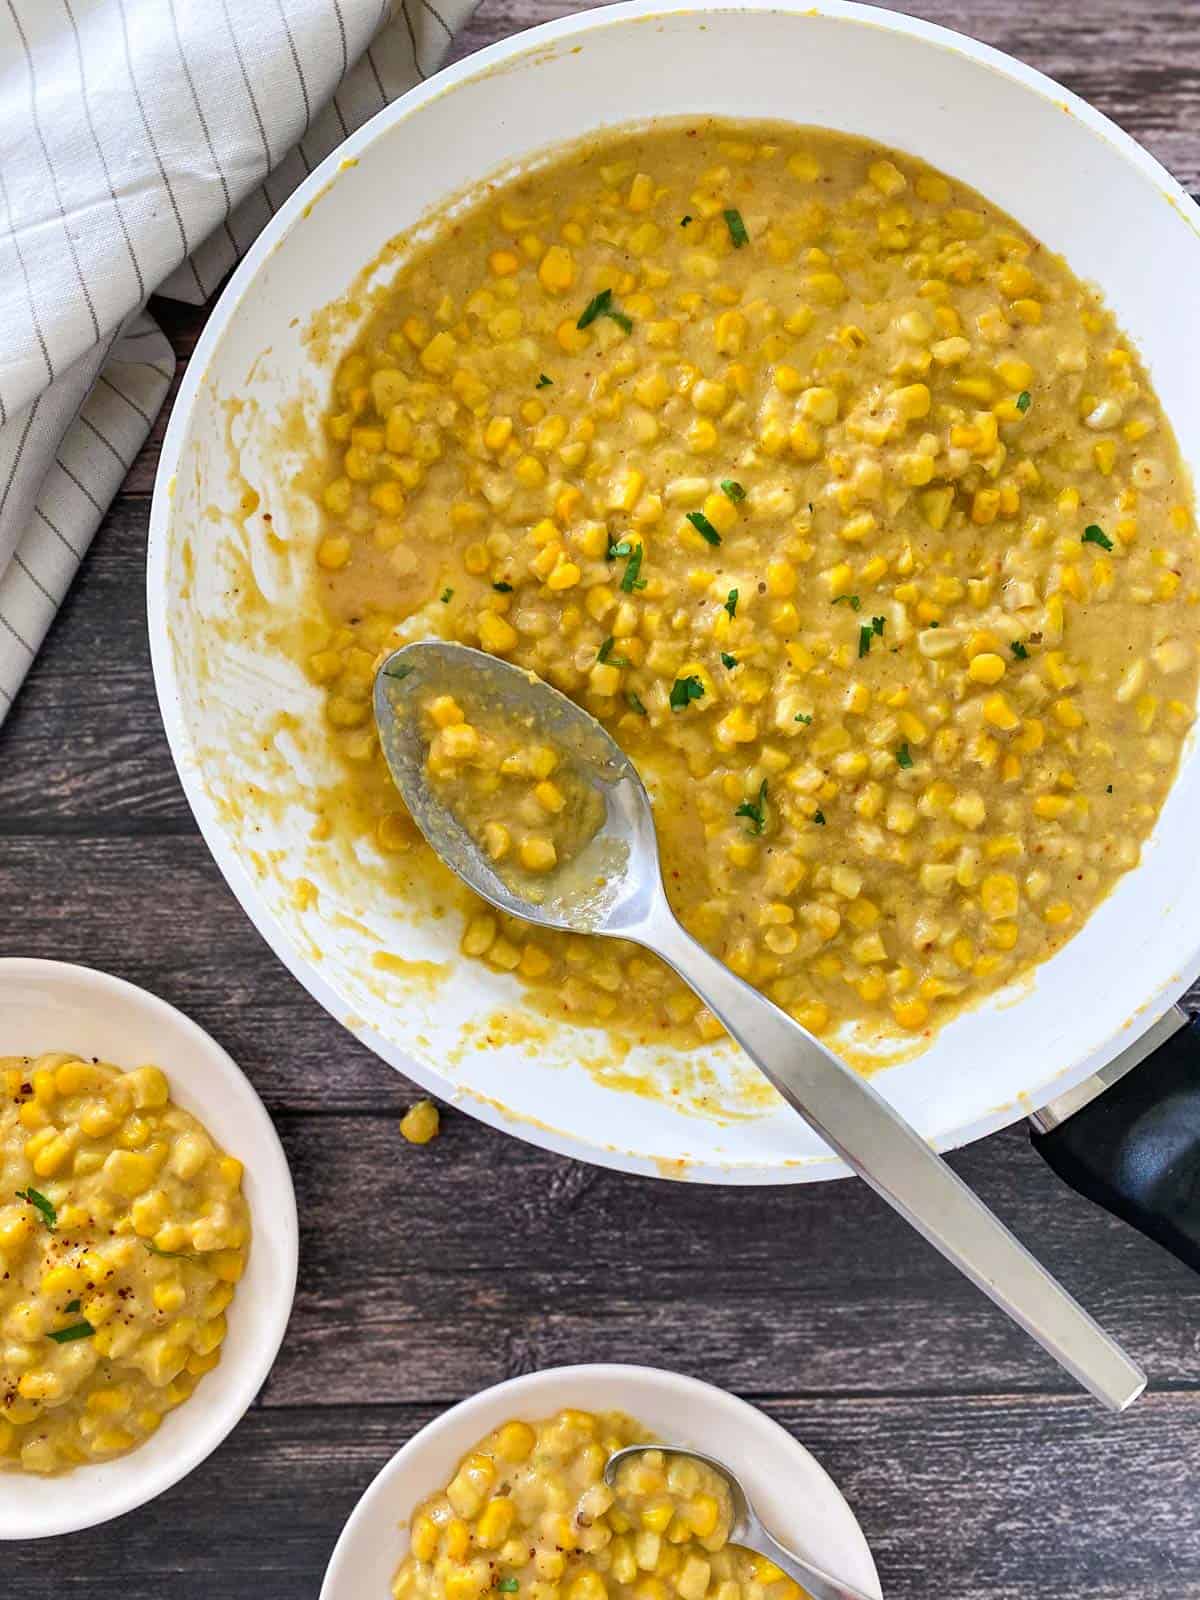 Skillet filled with creamed corn with large spoon resting inside.